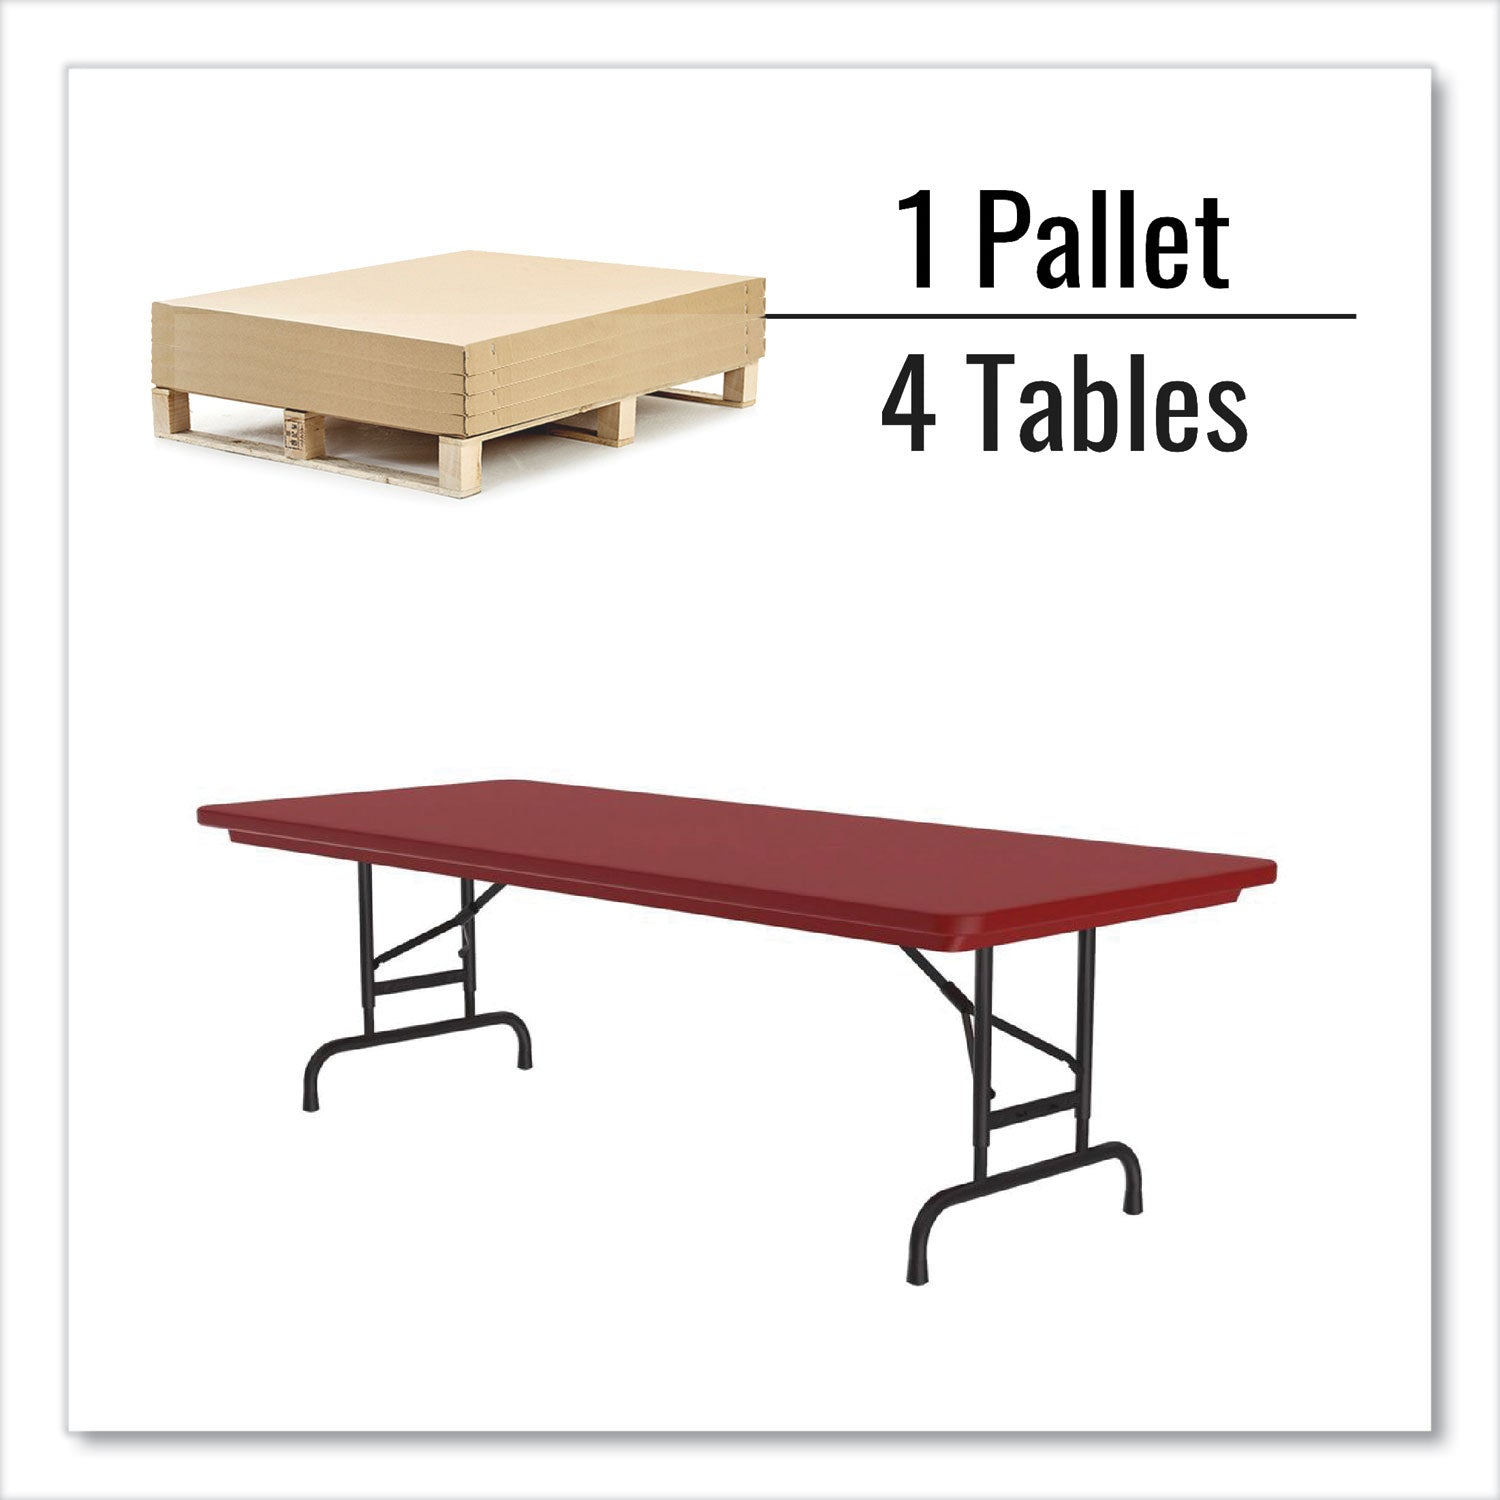 adjustable-folding-tables-rectangular-72-x-30-x-22-to-32-red-top-black-base-4-pallet-ships-in-4-6-business-days_crlra3072254p - 4